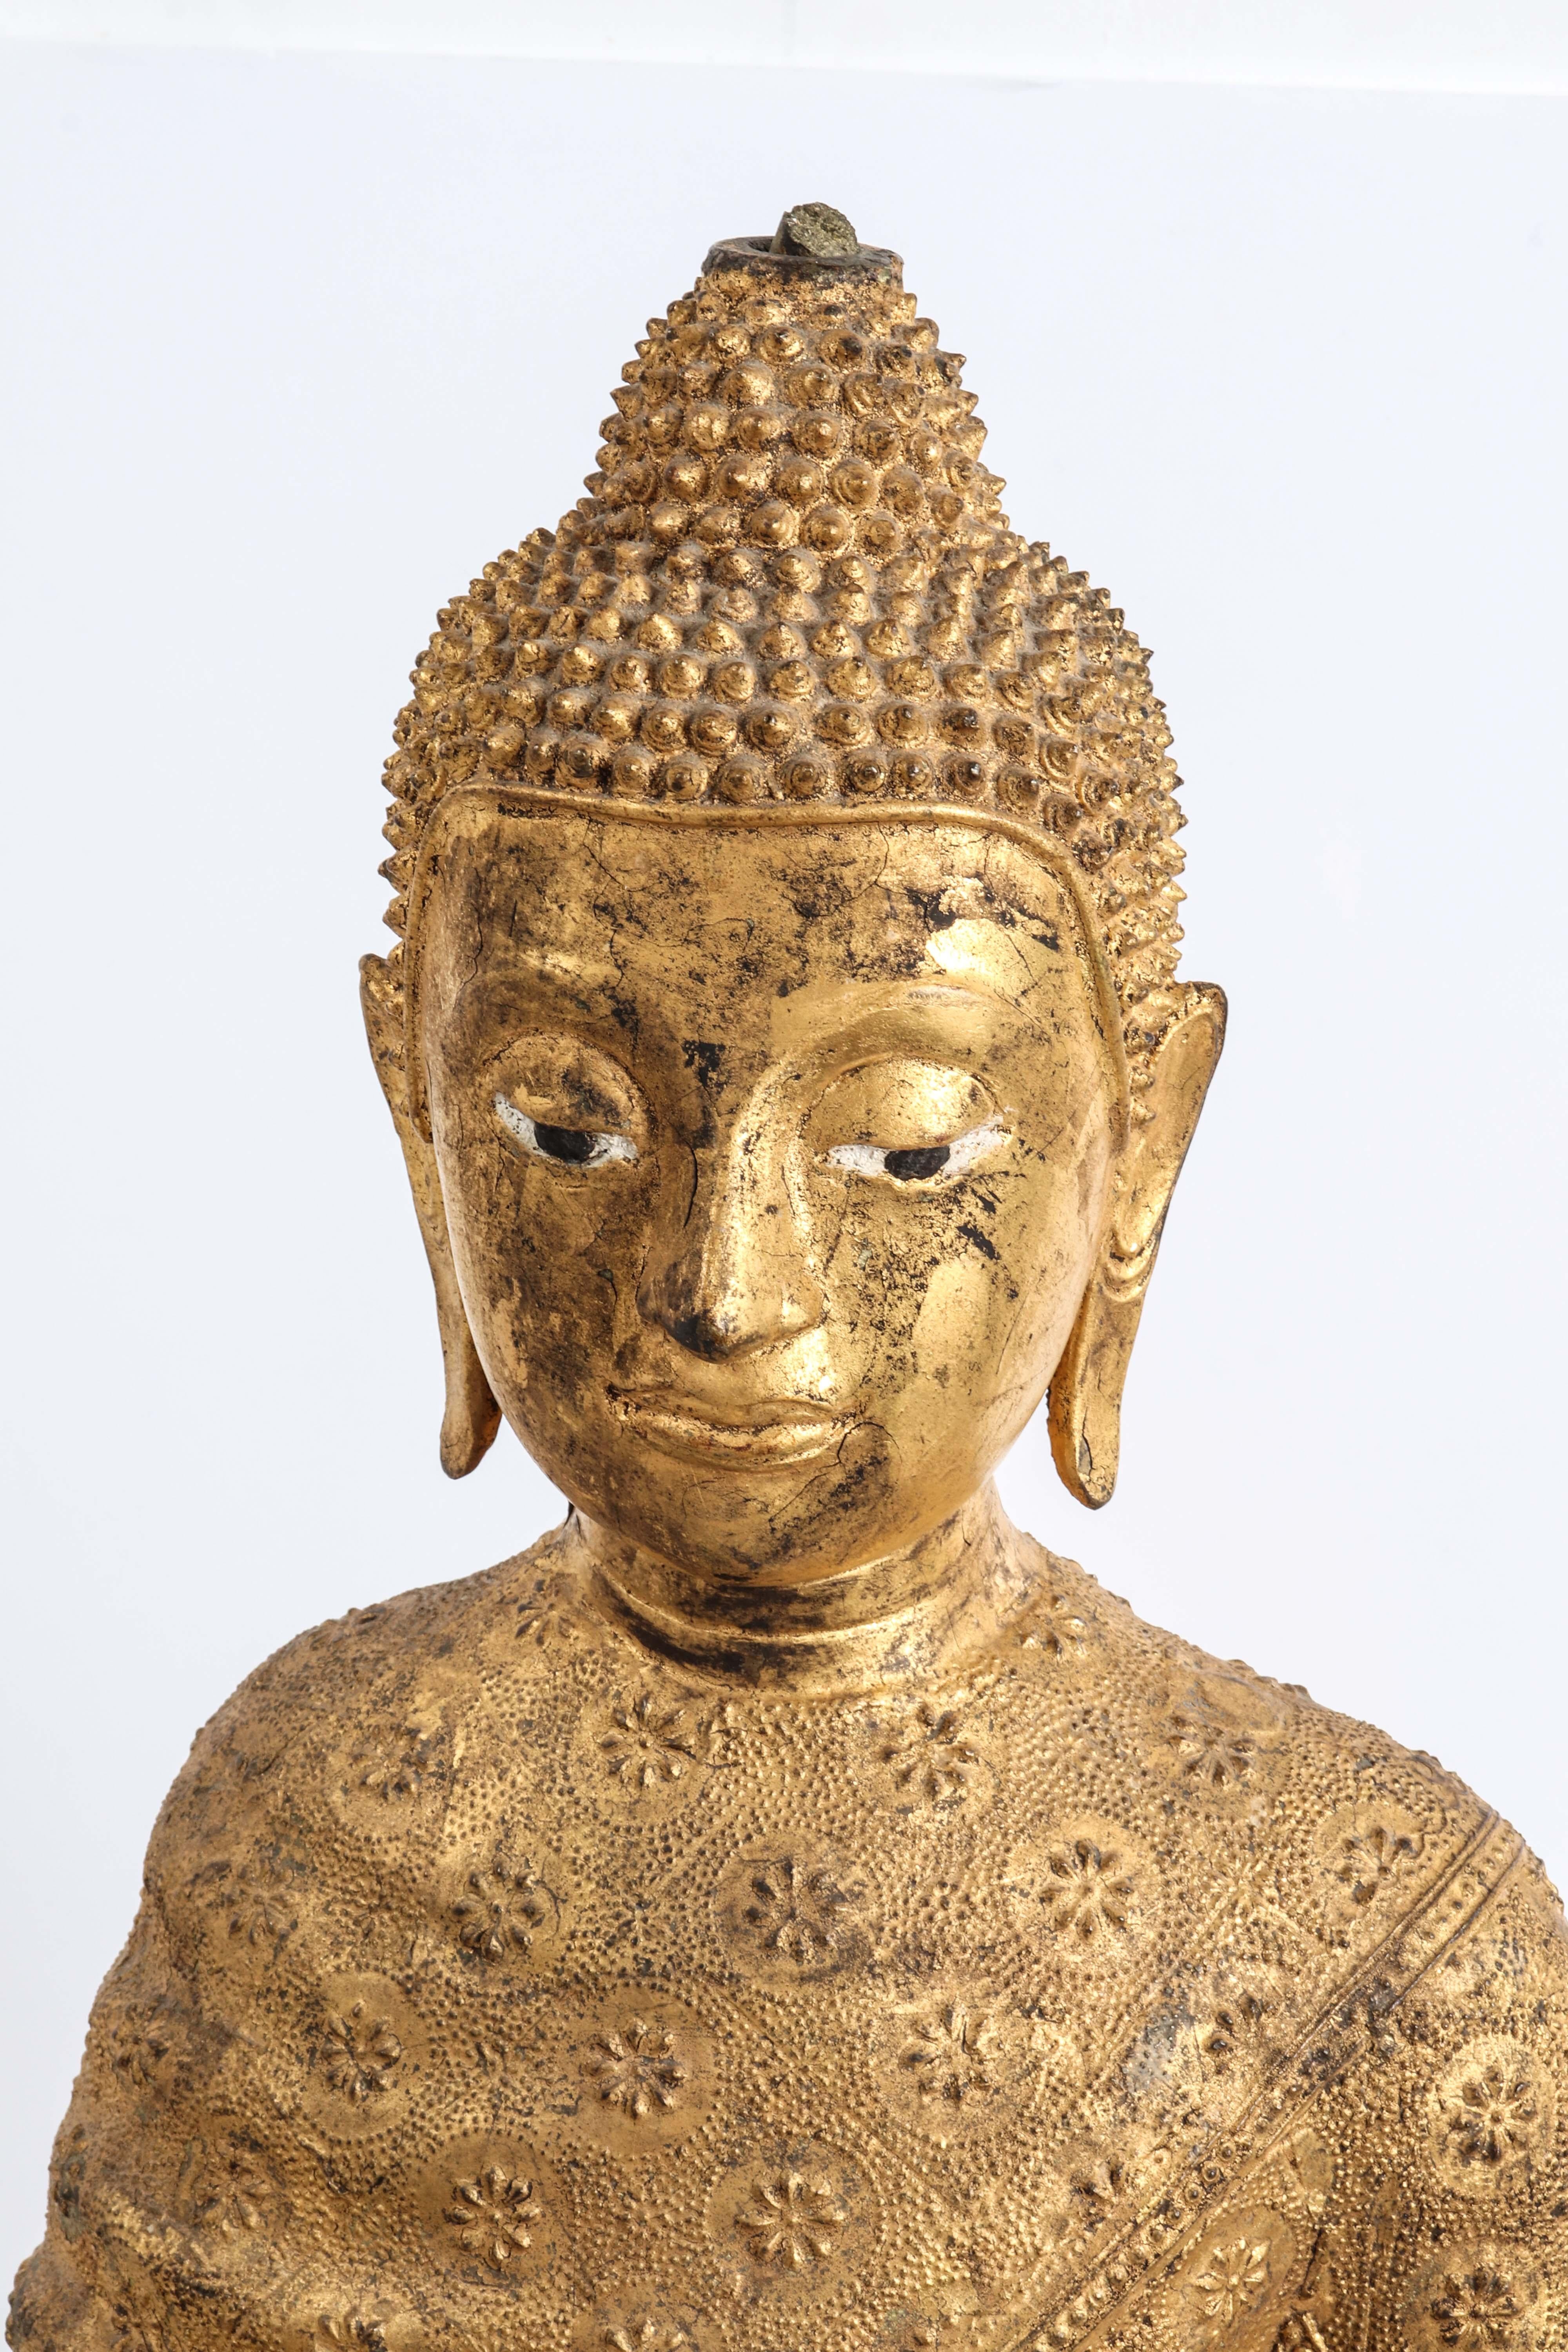 Thai gilt bronze sculpture of a standing Buddha in Abhaya mudra. The piece presents characteristics of the Rattanakosin period and dates from the 19th century/early 20th century. The figure is cloaked in a robe with all-over relief floral pattern